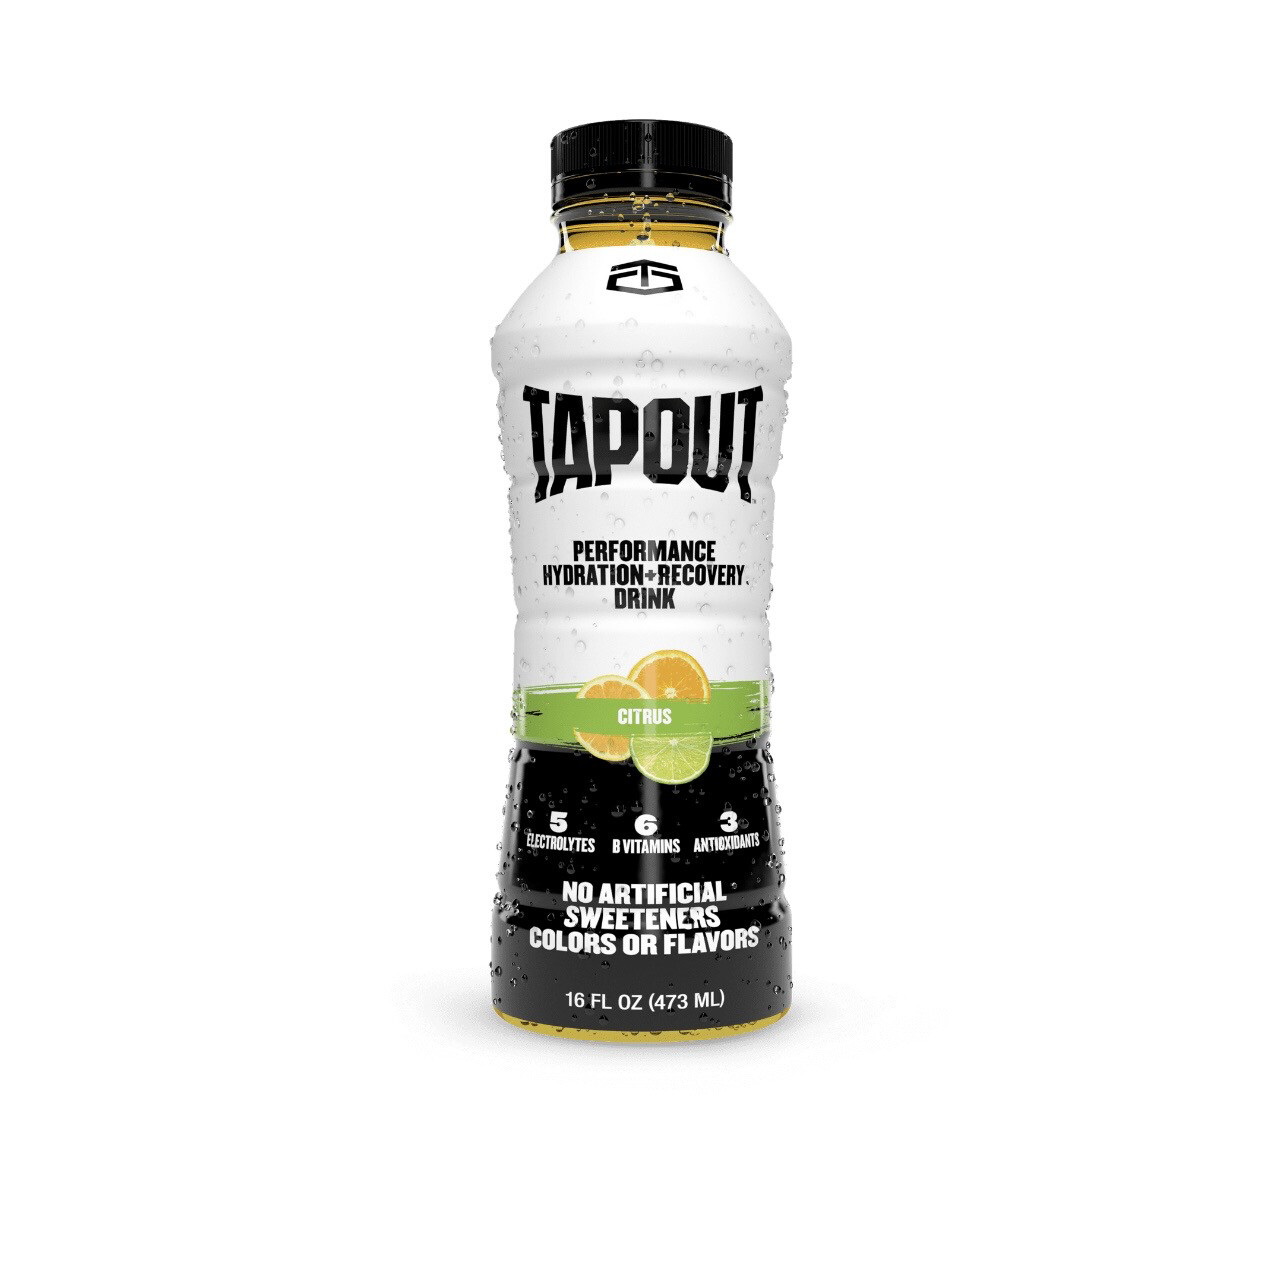 Tapout Performance Hydration + Recovery Drink Citrus